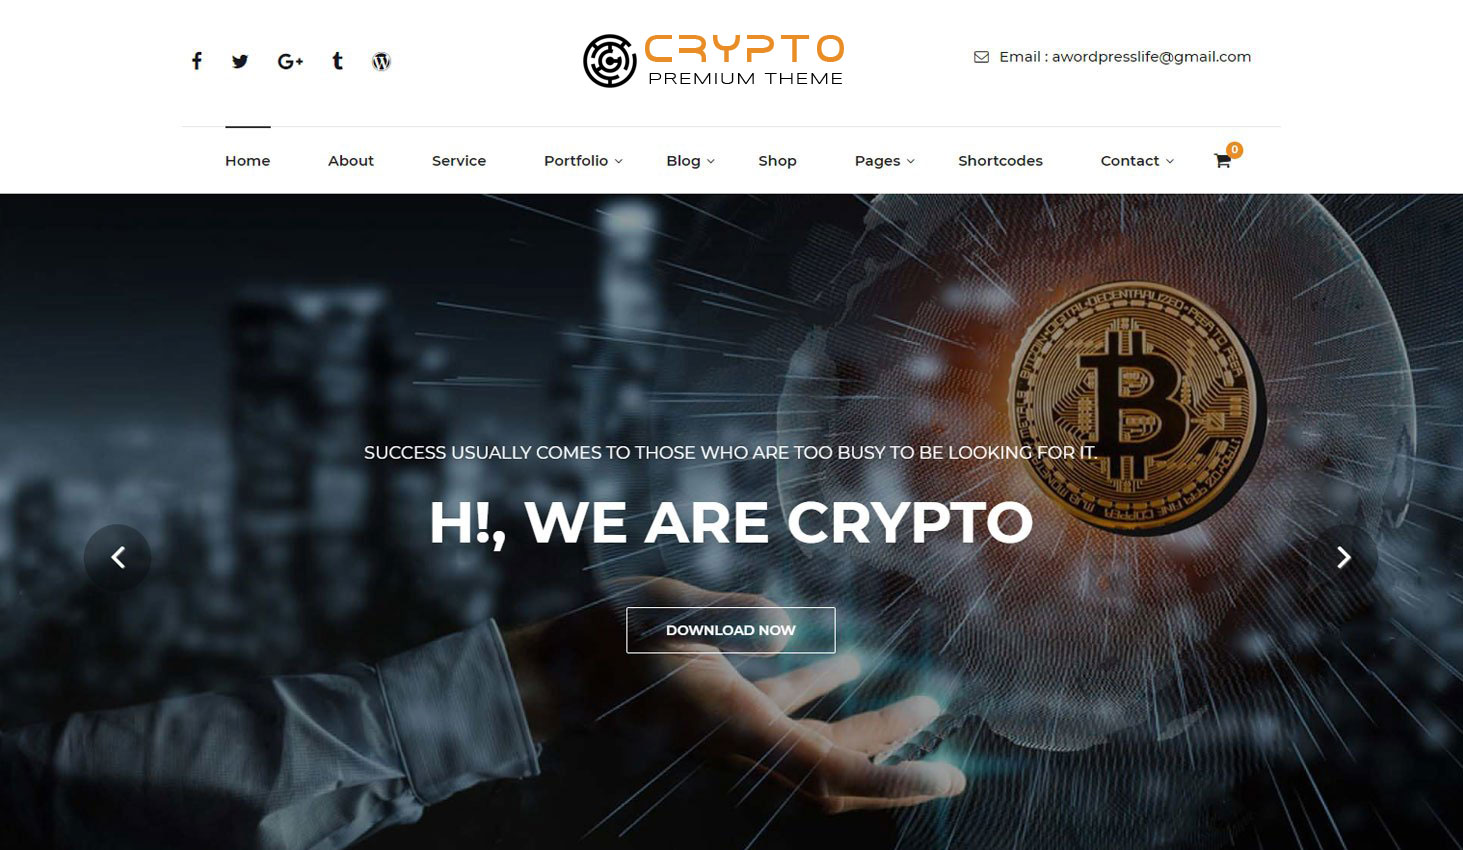 Crypto-Premium-WordPress-Theme-For-Cryptocurrency-Business-and-Blog-Websites-A-WP-Life-Homepage-Template